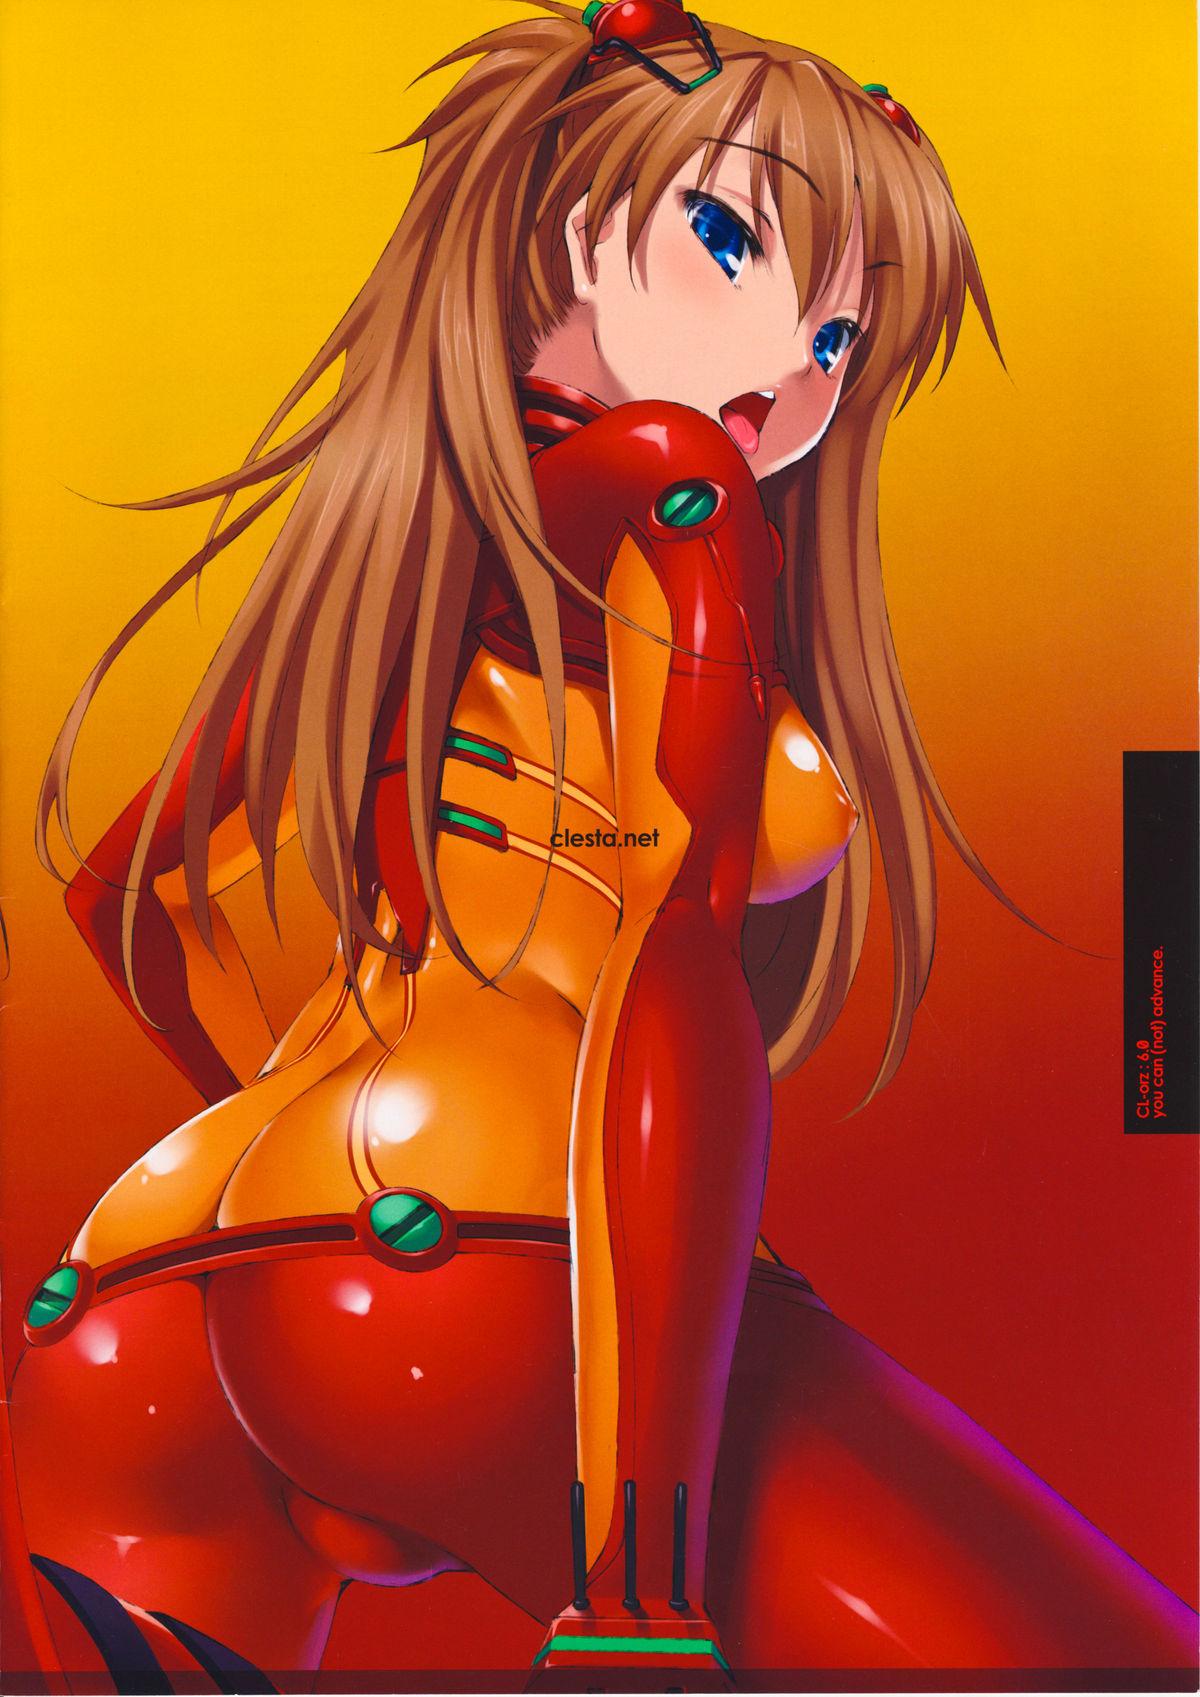 Fun (C76) [Clesta (Cle Masahiro)] CL-orz 6.0 you can (not) advance. (Rebuild of Evangelion) [Decensored] - Neon genesis evangelion Teen Fuck - Page 16